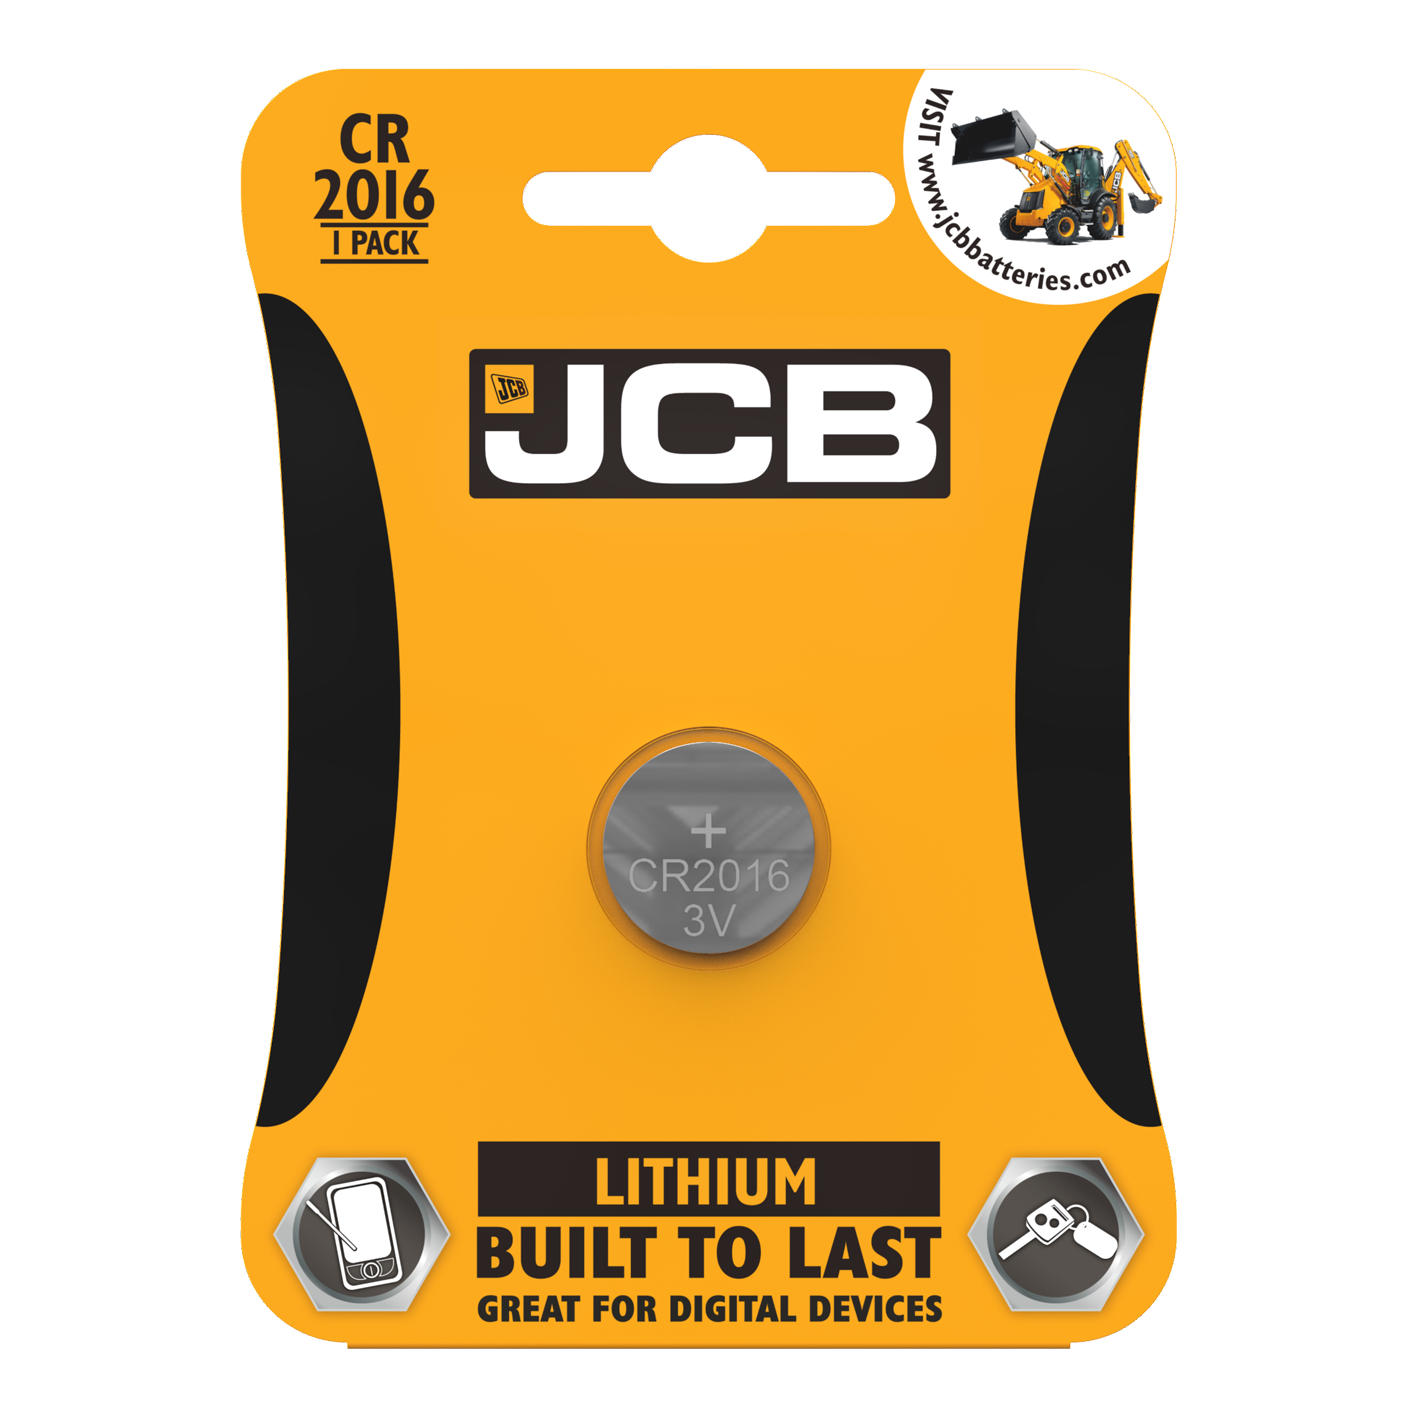 JCB CR2016 Lithium Coin Cell, Pack of 1